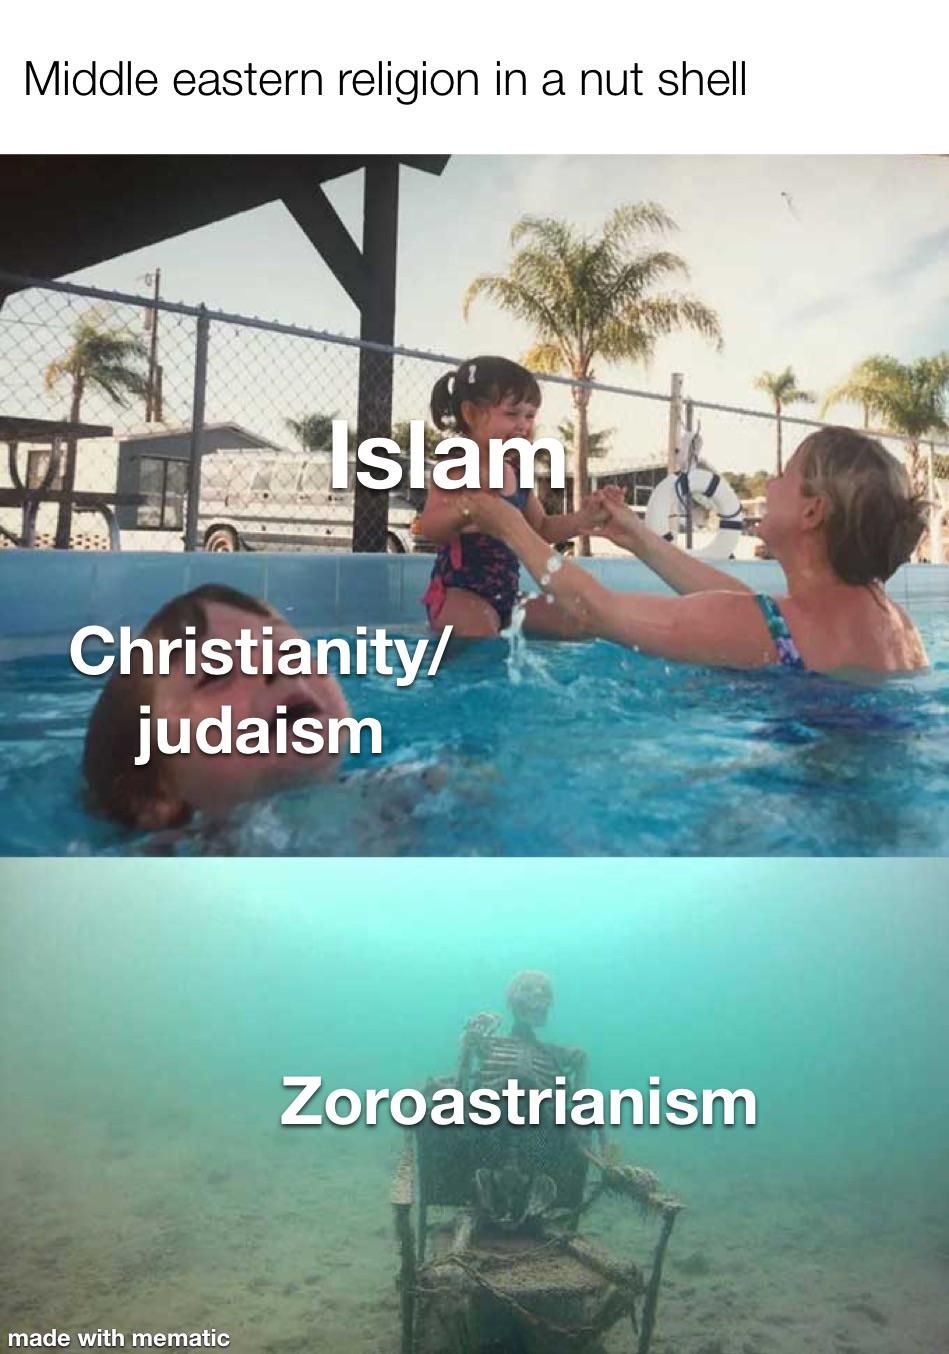 How history see middle eastern religions .